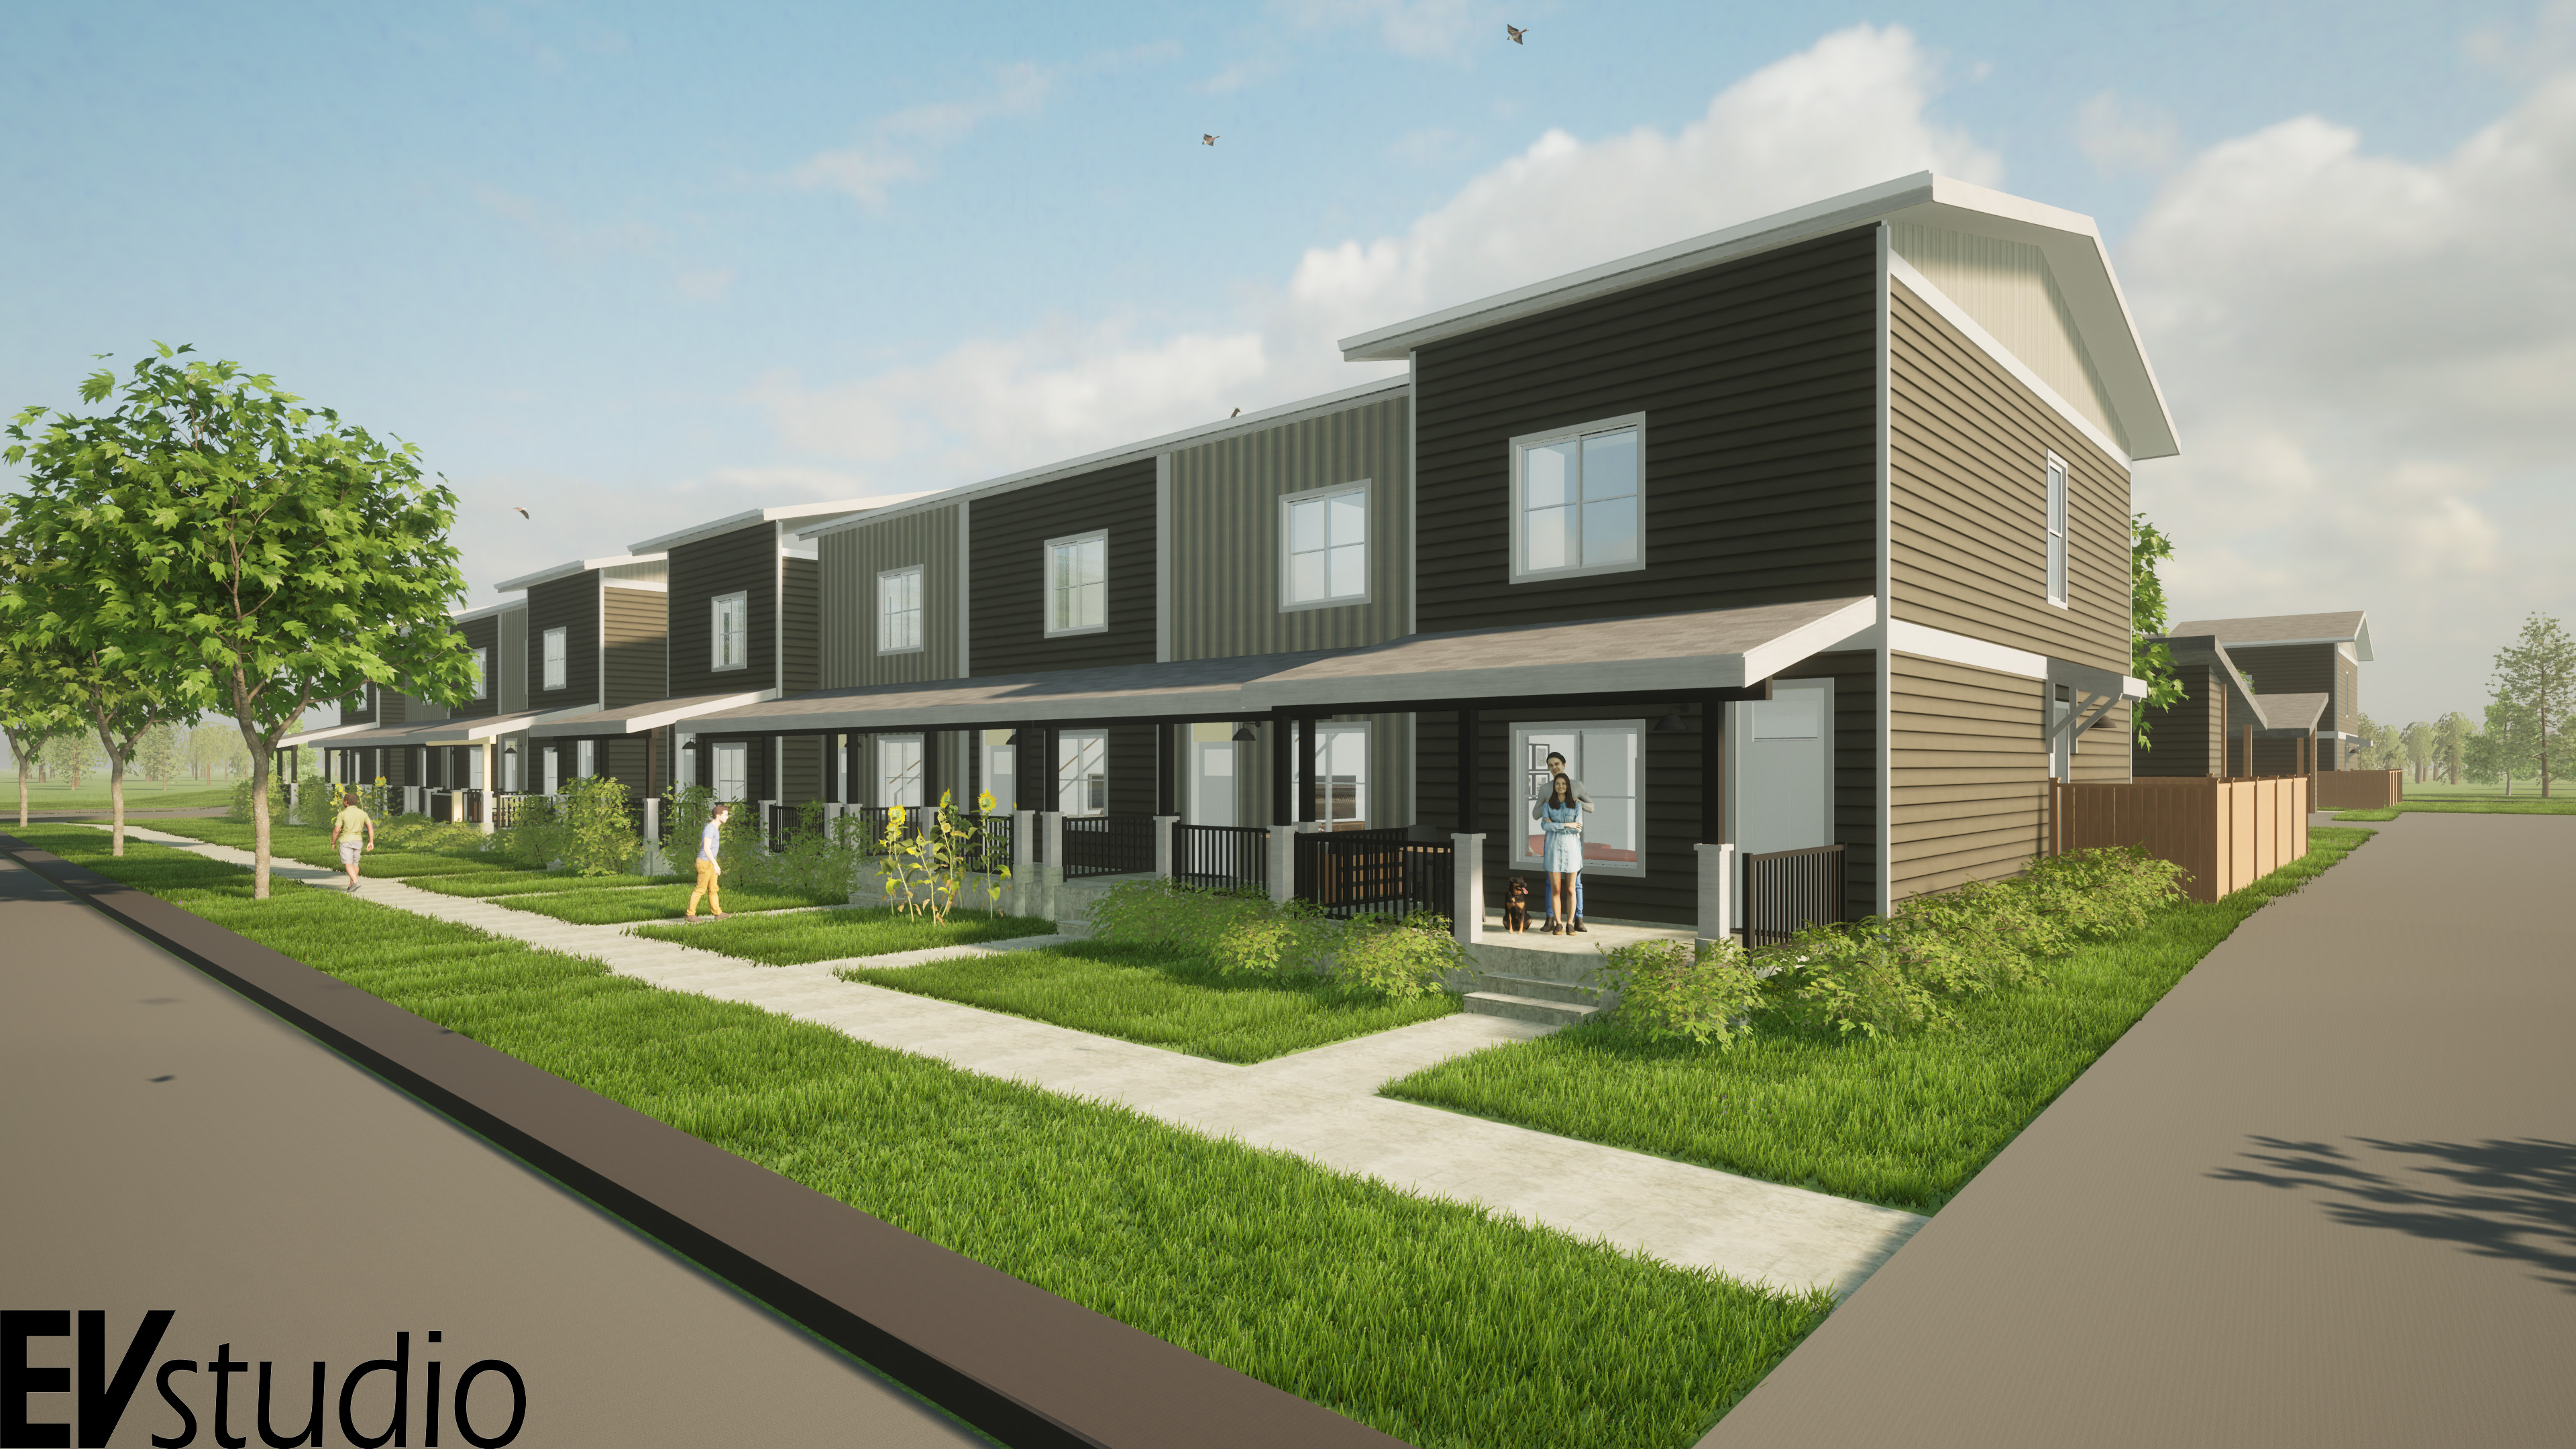 The 8th St. Townhomes image